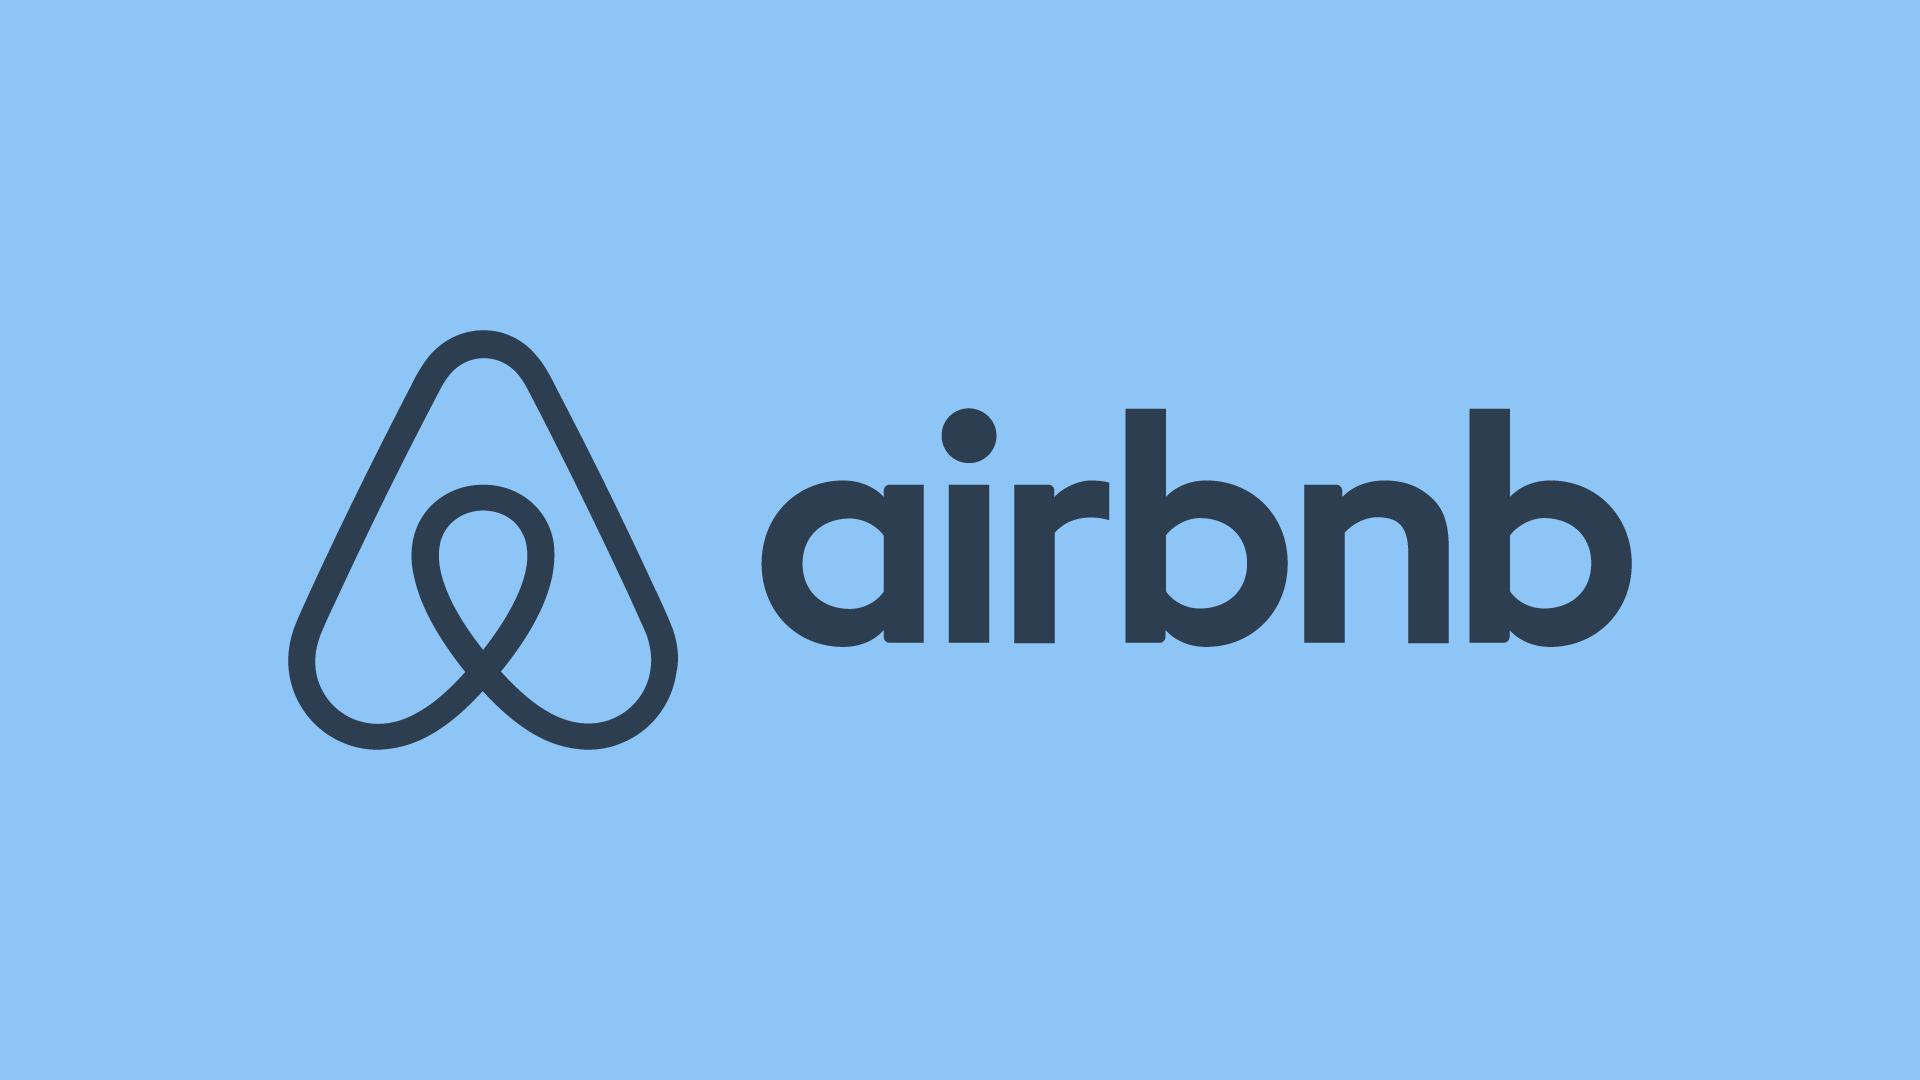 Airbnb's Remarkable PPC advertising Journey: From Local Listings to Global Hospitality Giant